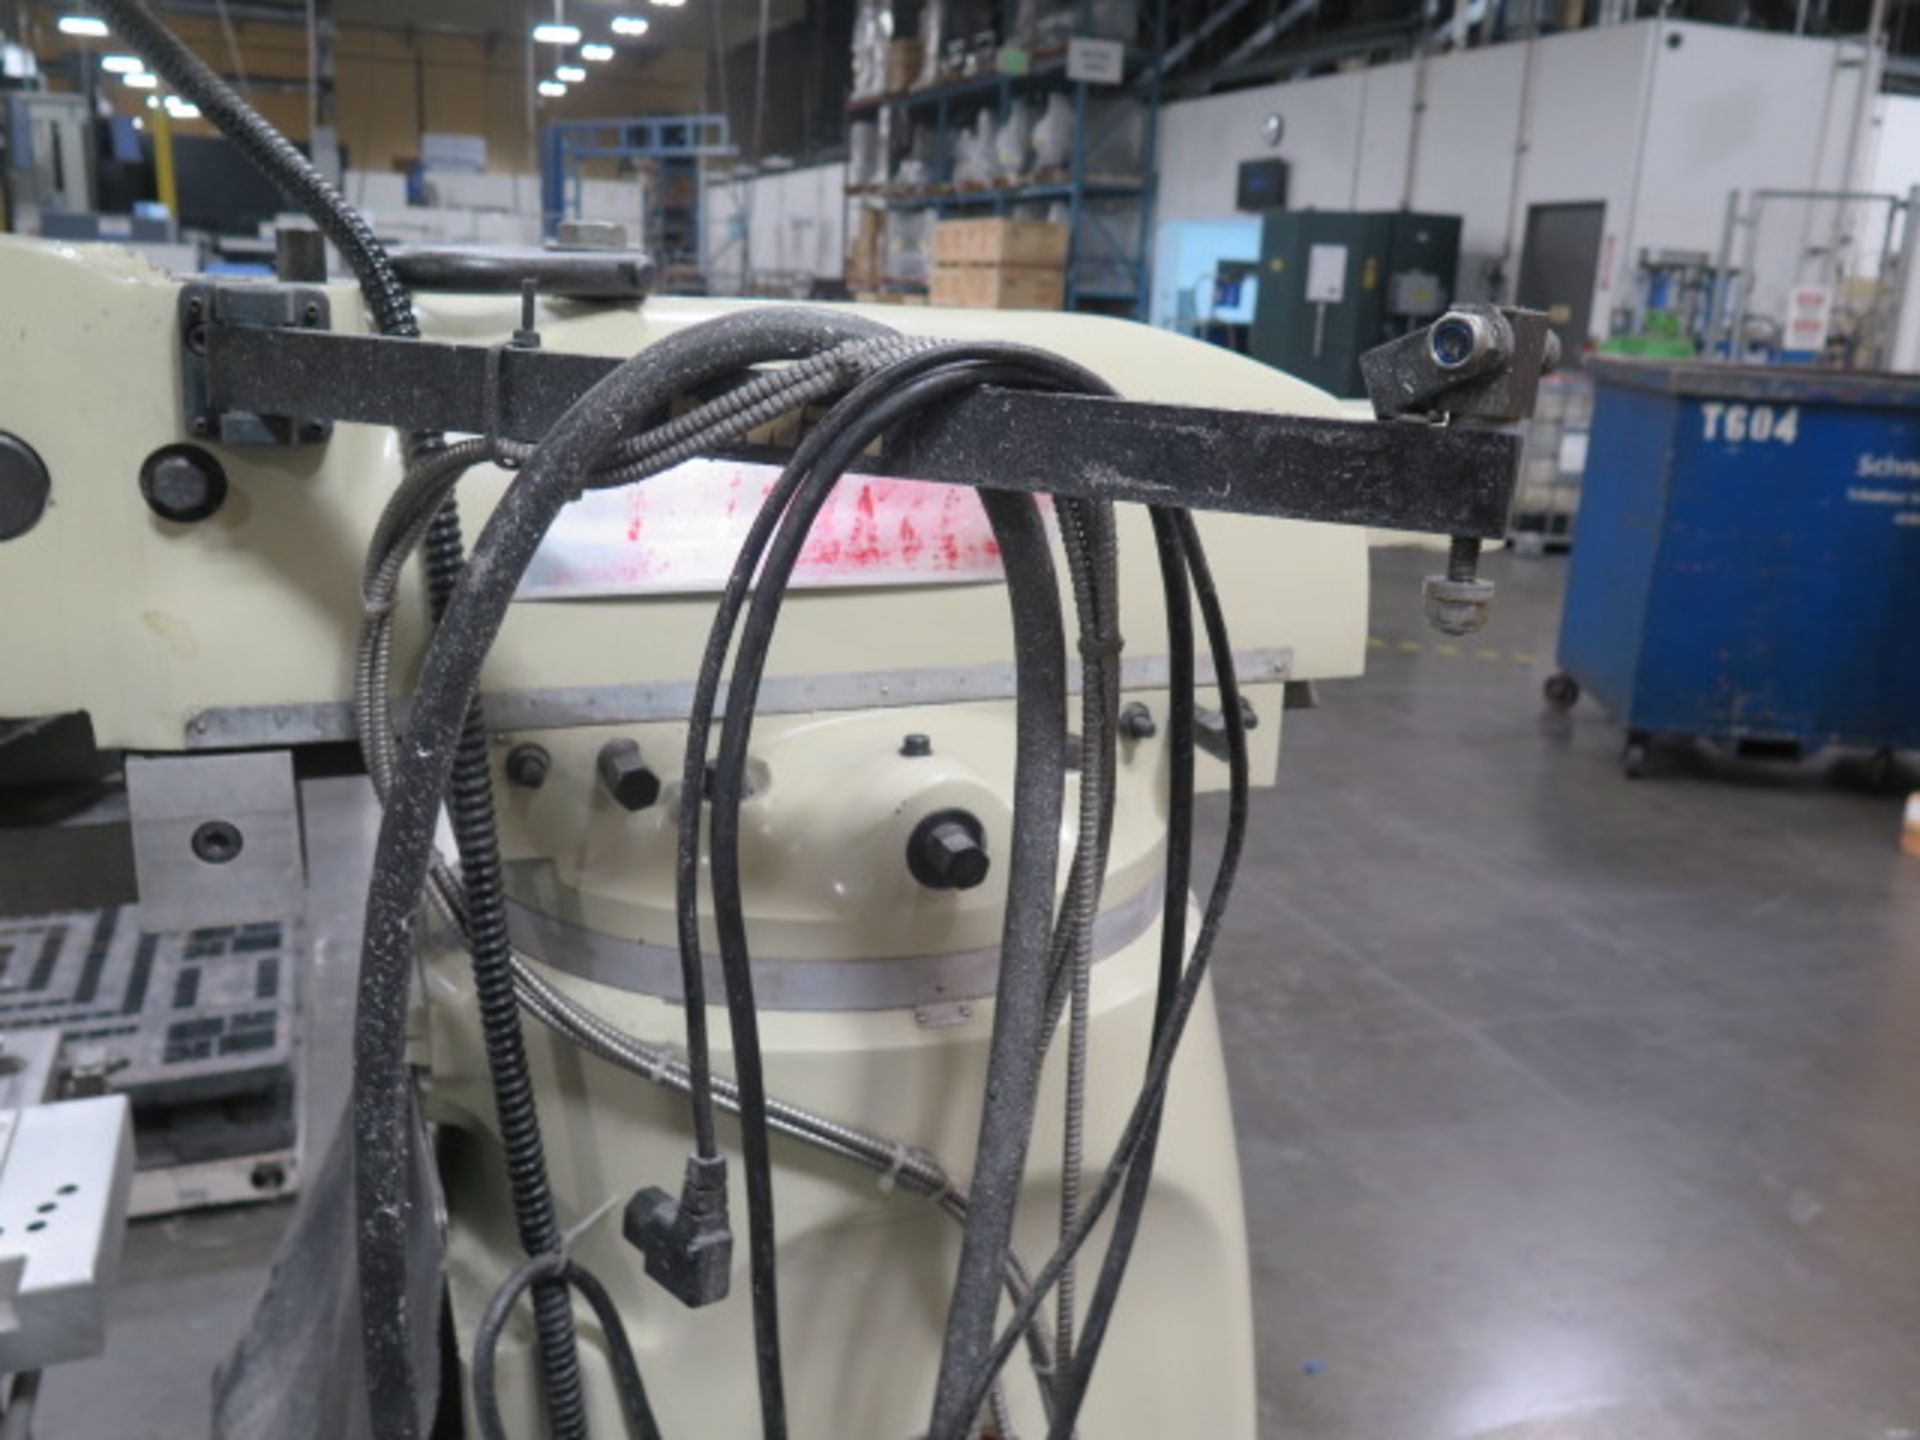 Acer Ultima Vertical Mill w/ 3Hp Motor, 60-4200 Dial Change RPM, Chrome Ways, Power “Y” and Knee Fe - Image 6 of 12